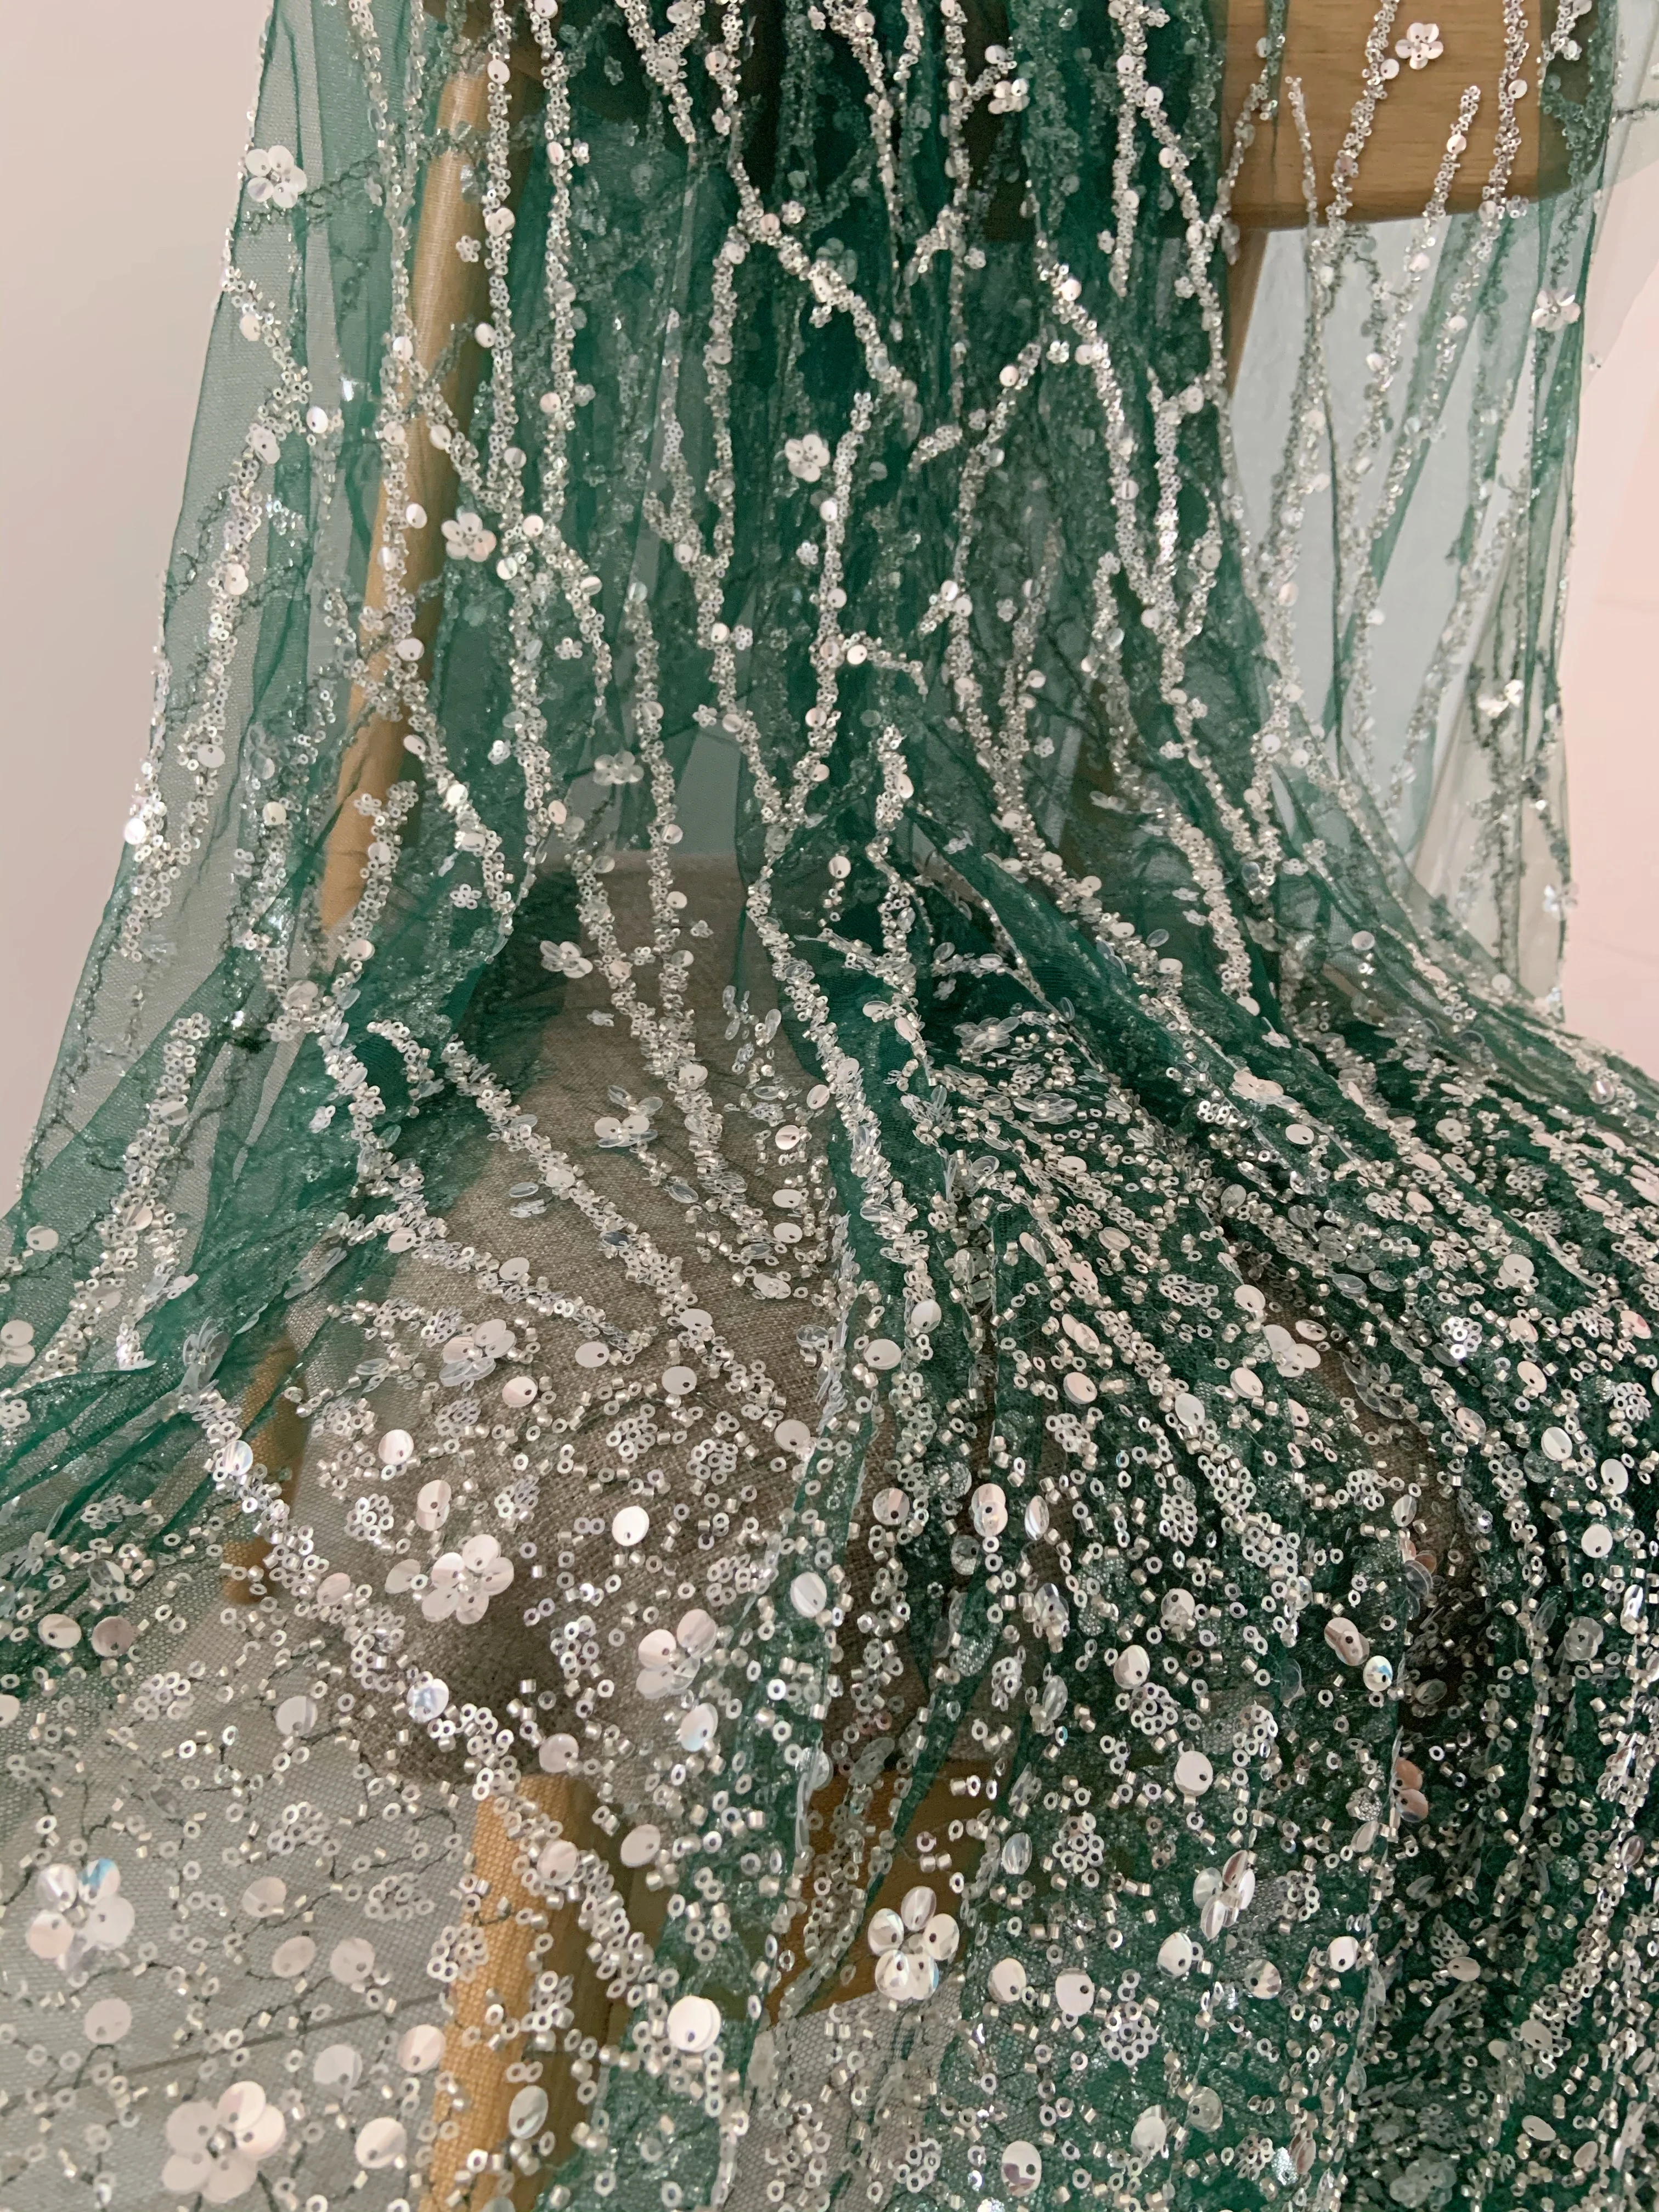 

1 Yard Dark Green Sparkle Tulle Lace Fabric with Sequin Bead Floral Branches for Couture,Wedding Dress Decor